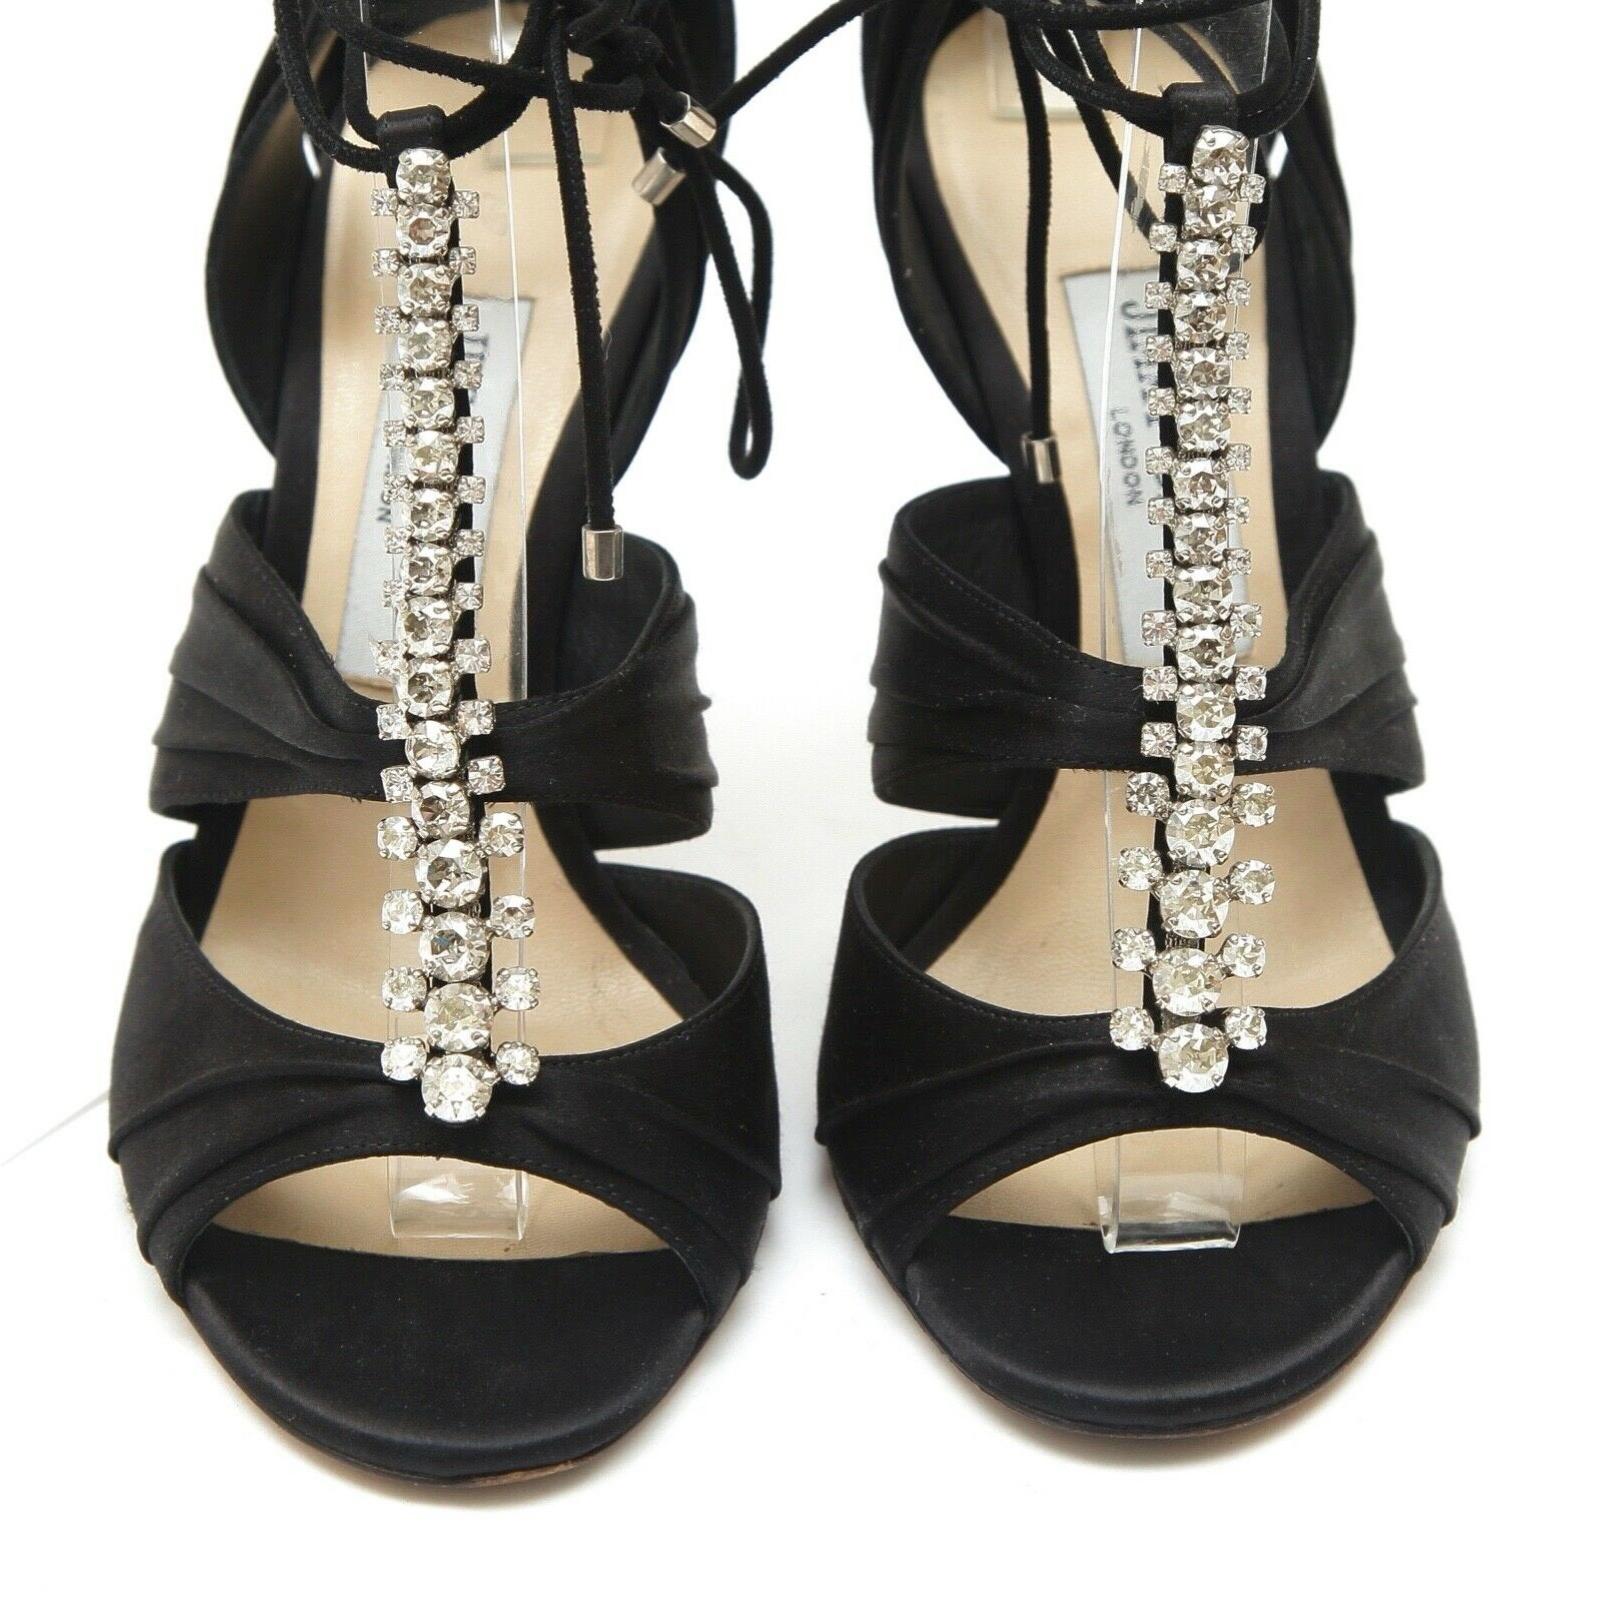 JIMMY CHOO Black Satin Sandal Crystal KENNY 100 Leather T-Strap 37.5 $1295 In Good Condition For Sale In Hollywood, FL